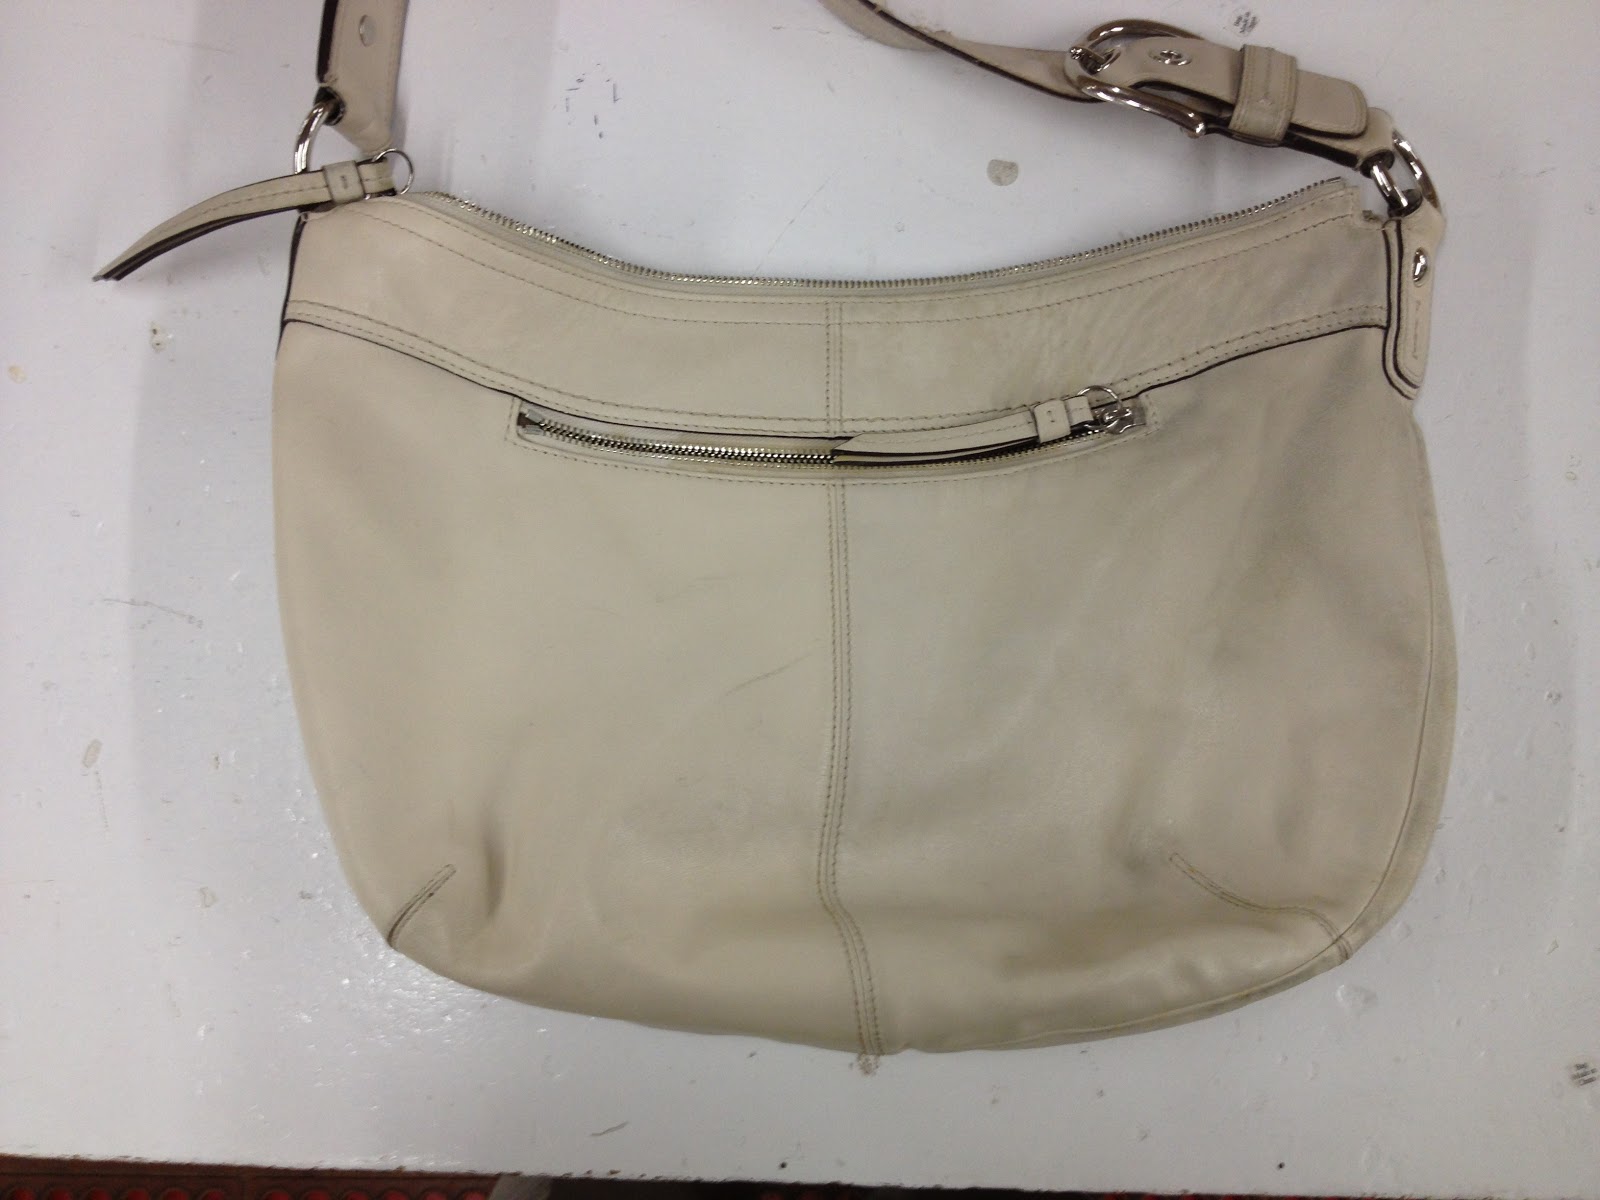 Leather Cleaning, Re-dyeing and Restoration: Off White Coach Purse Restored